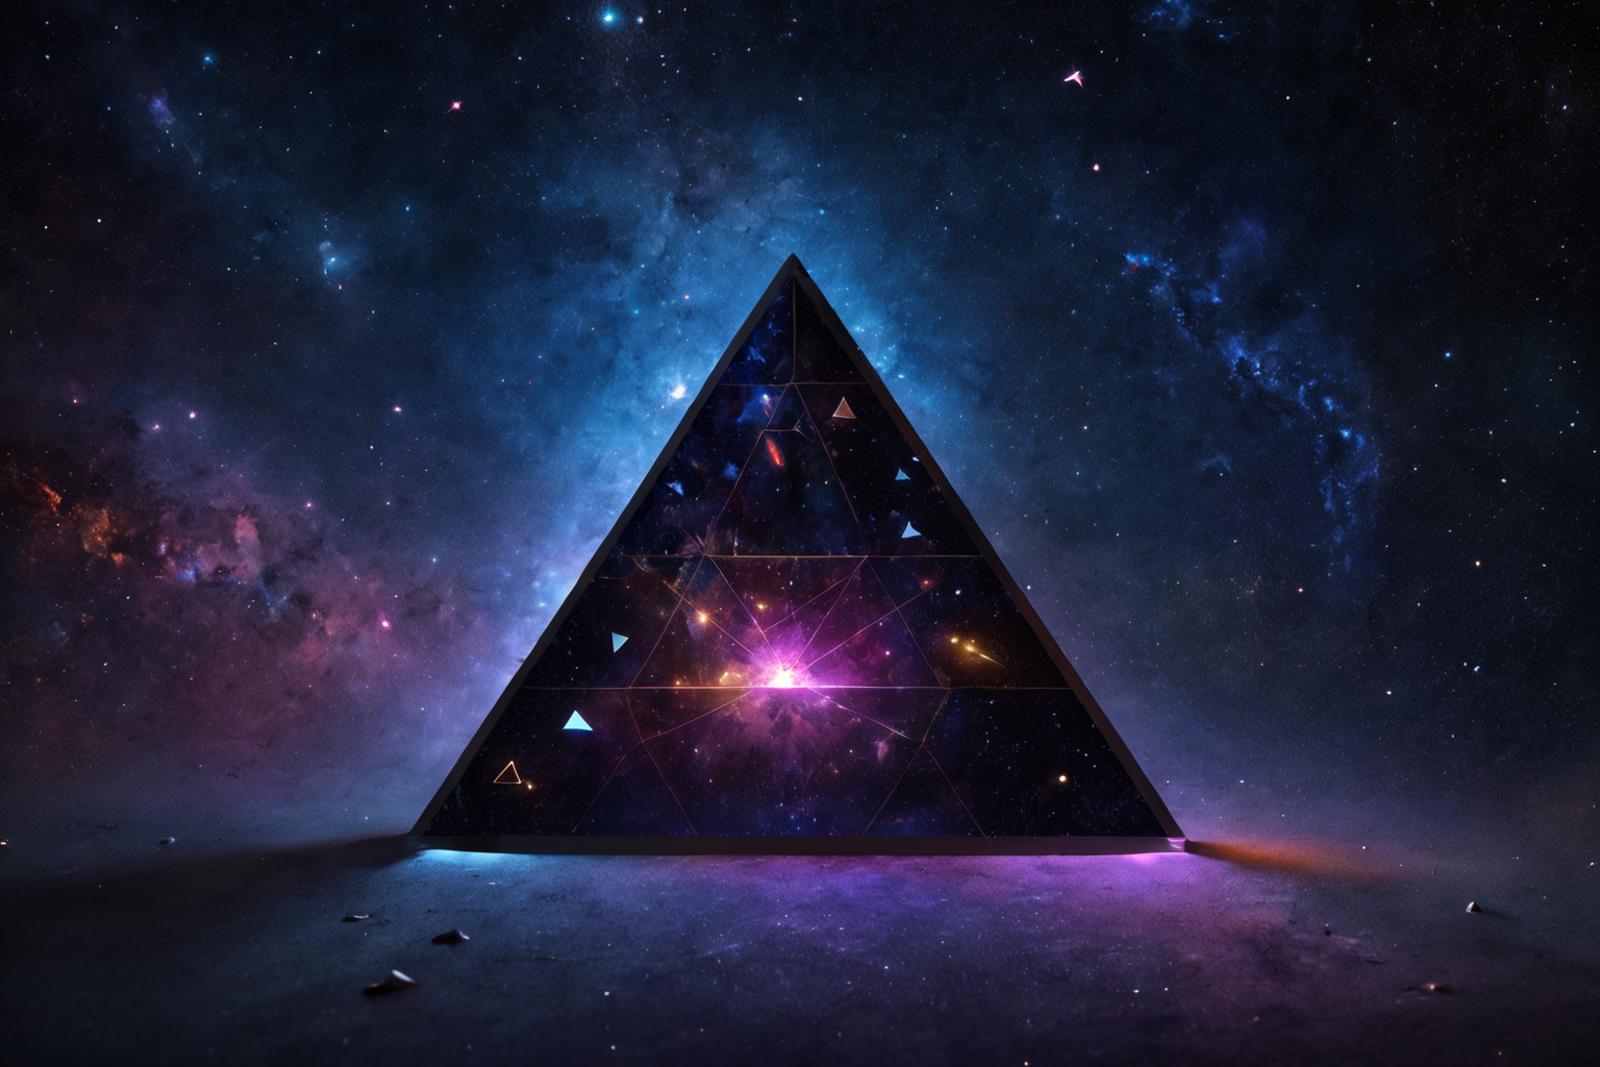 A Triangular Pyramid with Glowing Lights and Colorful Star Fields